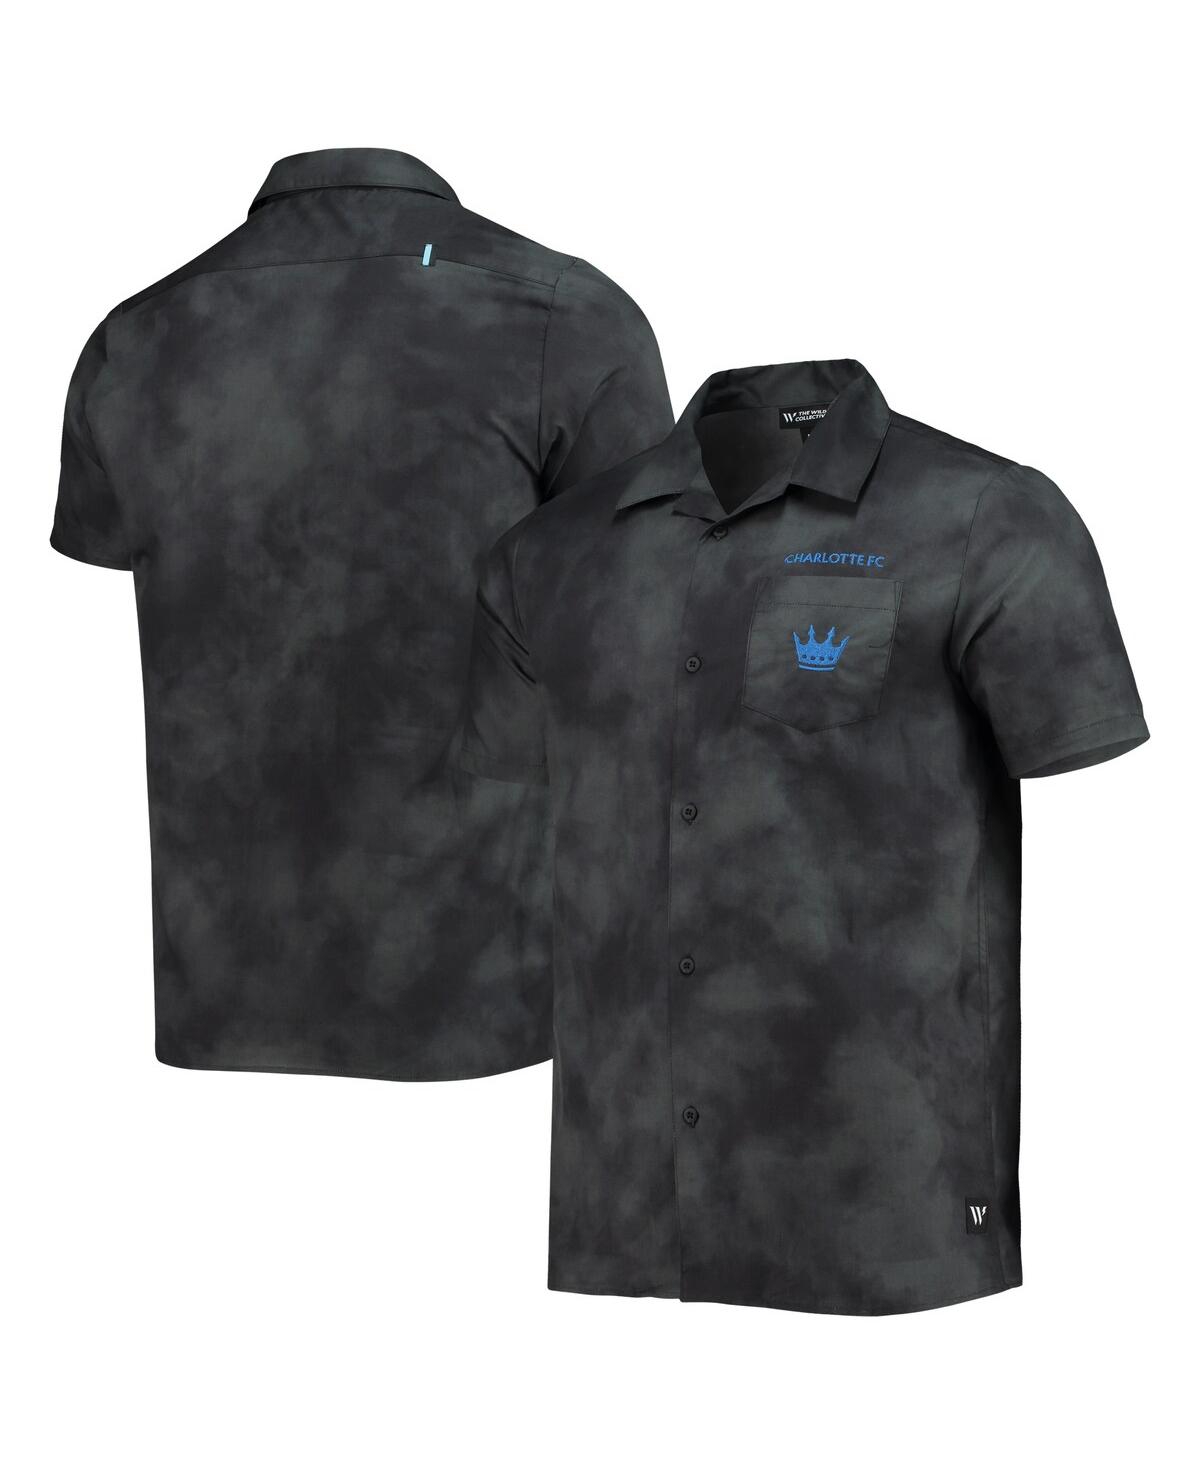 THE WILD COLLECTIVE MEN'S THE WILD COLLECTIVE BLACK CHARLOTTE FC ABSTRACT CLOUD BUTTON-UP SHIRT